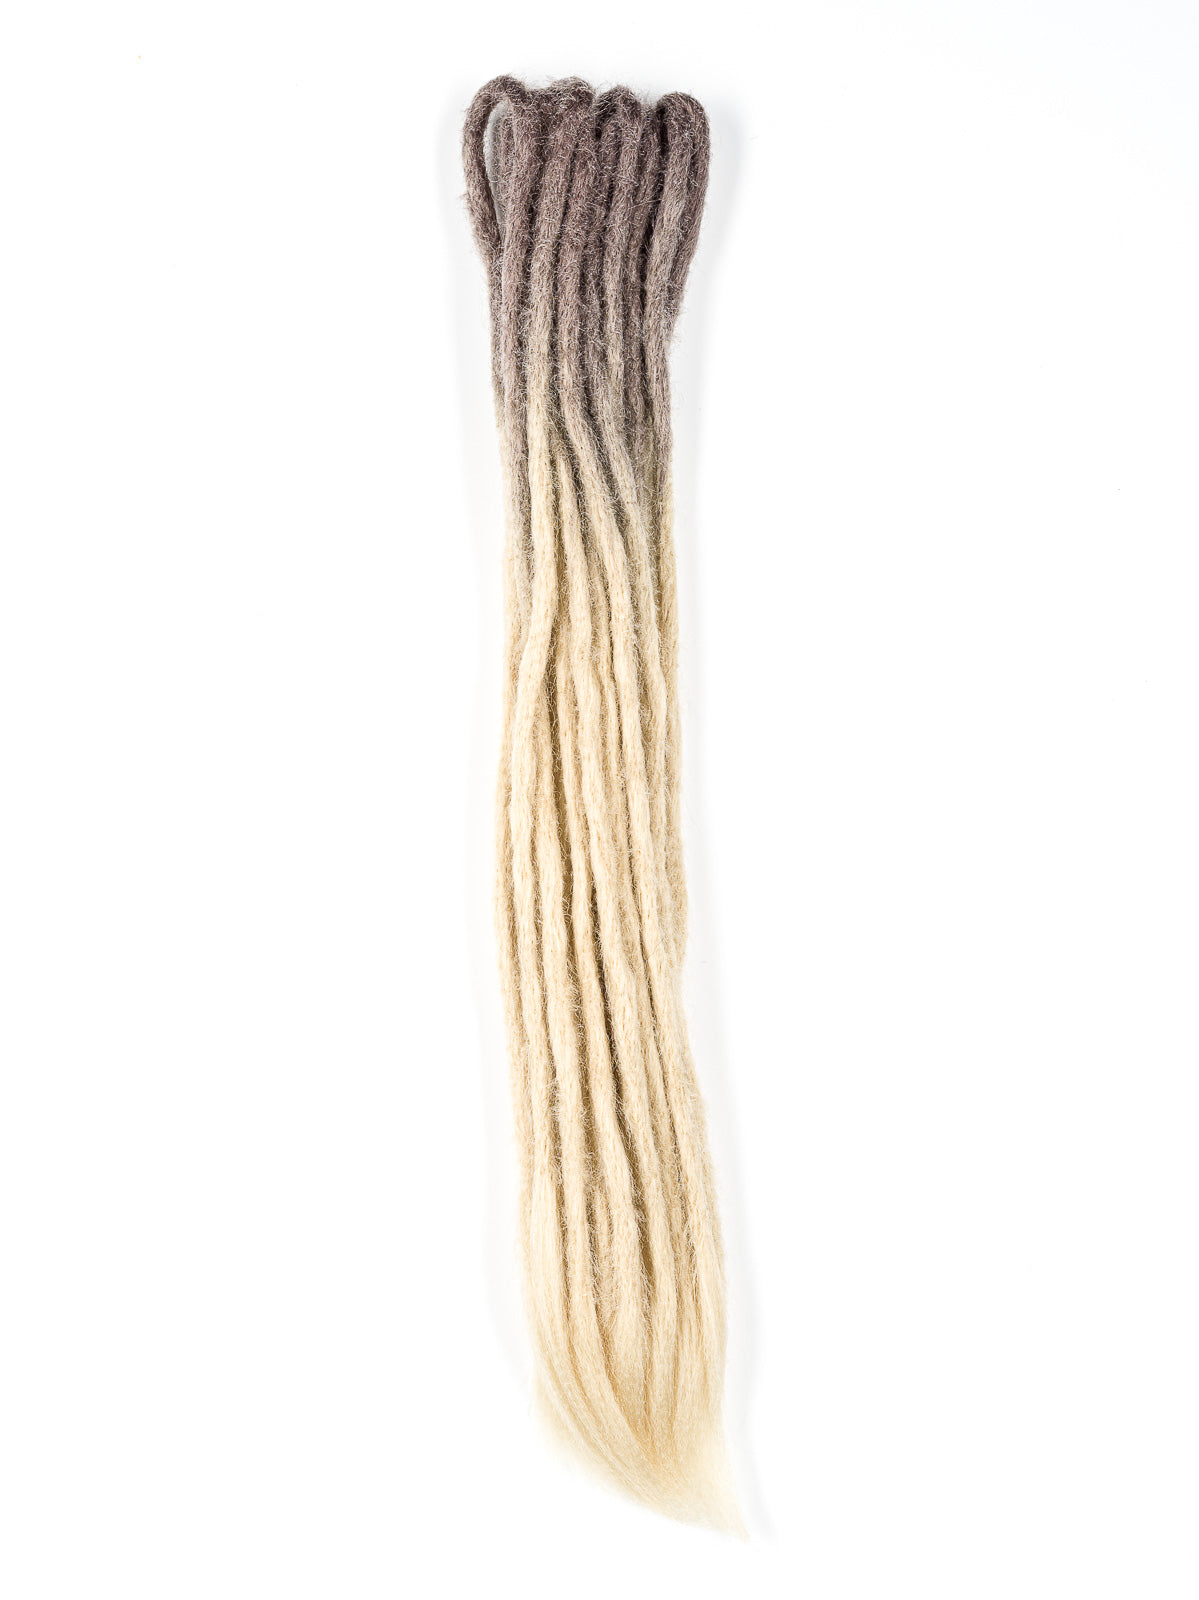 DreadLab - Double Ended Synthetic Dreadlocks (Pack of 10) Ombre Crochet Extensions